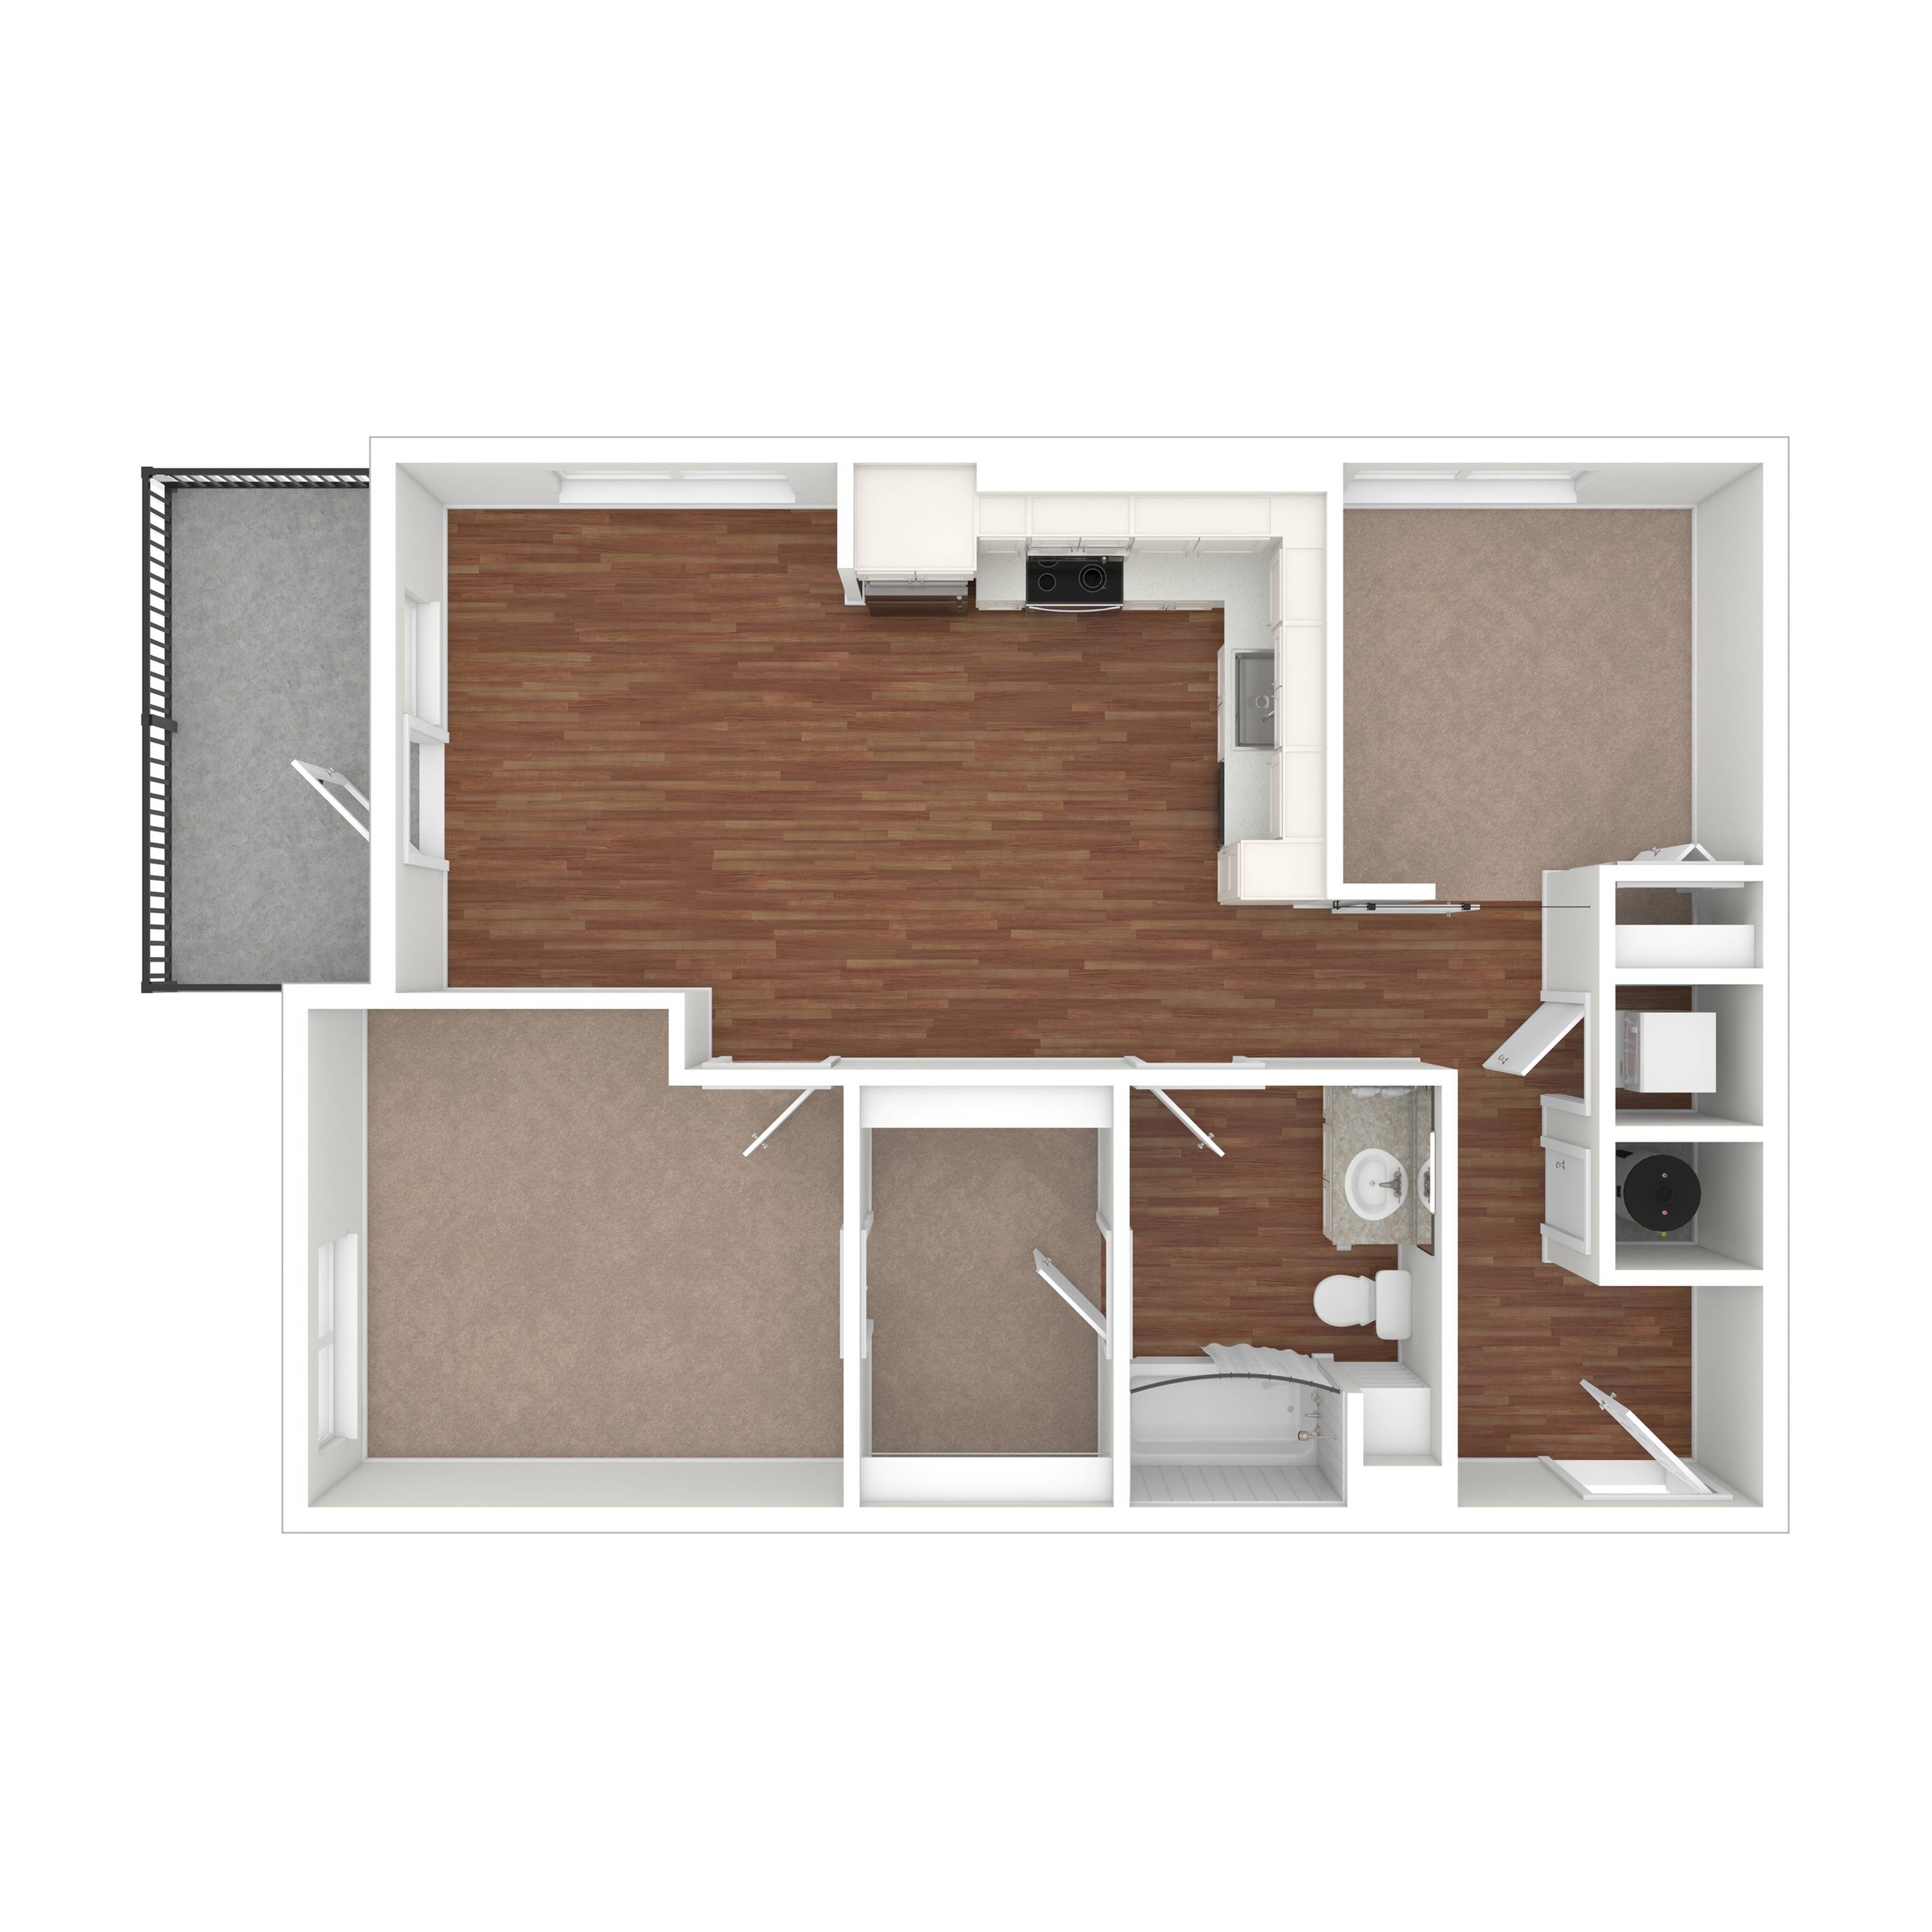 1 Bedroom Floor Plan | Apartments For Rent In Lacey Wa | Martingale